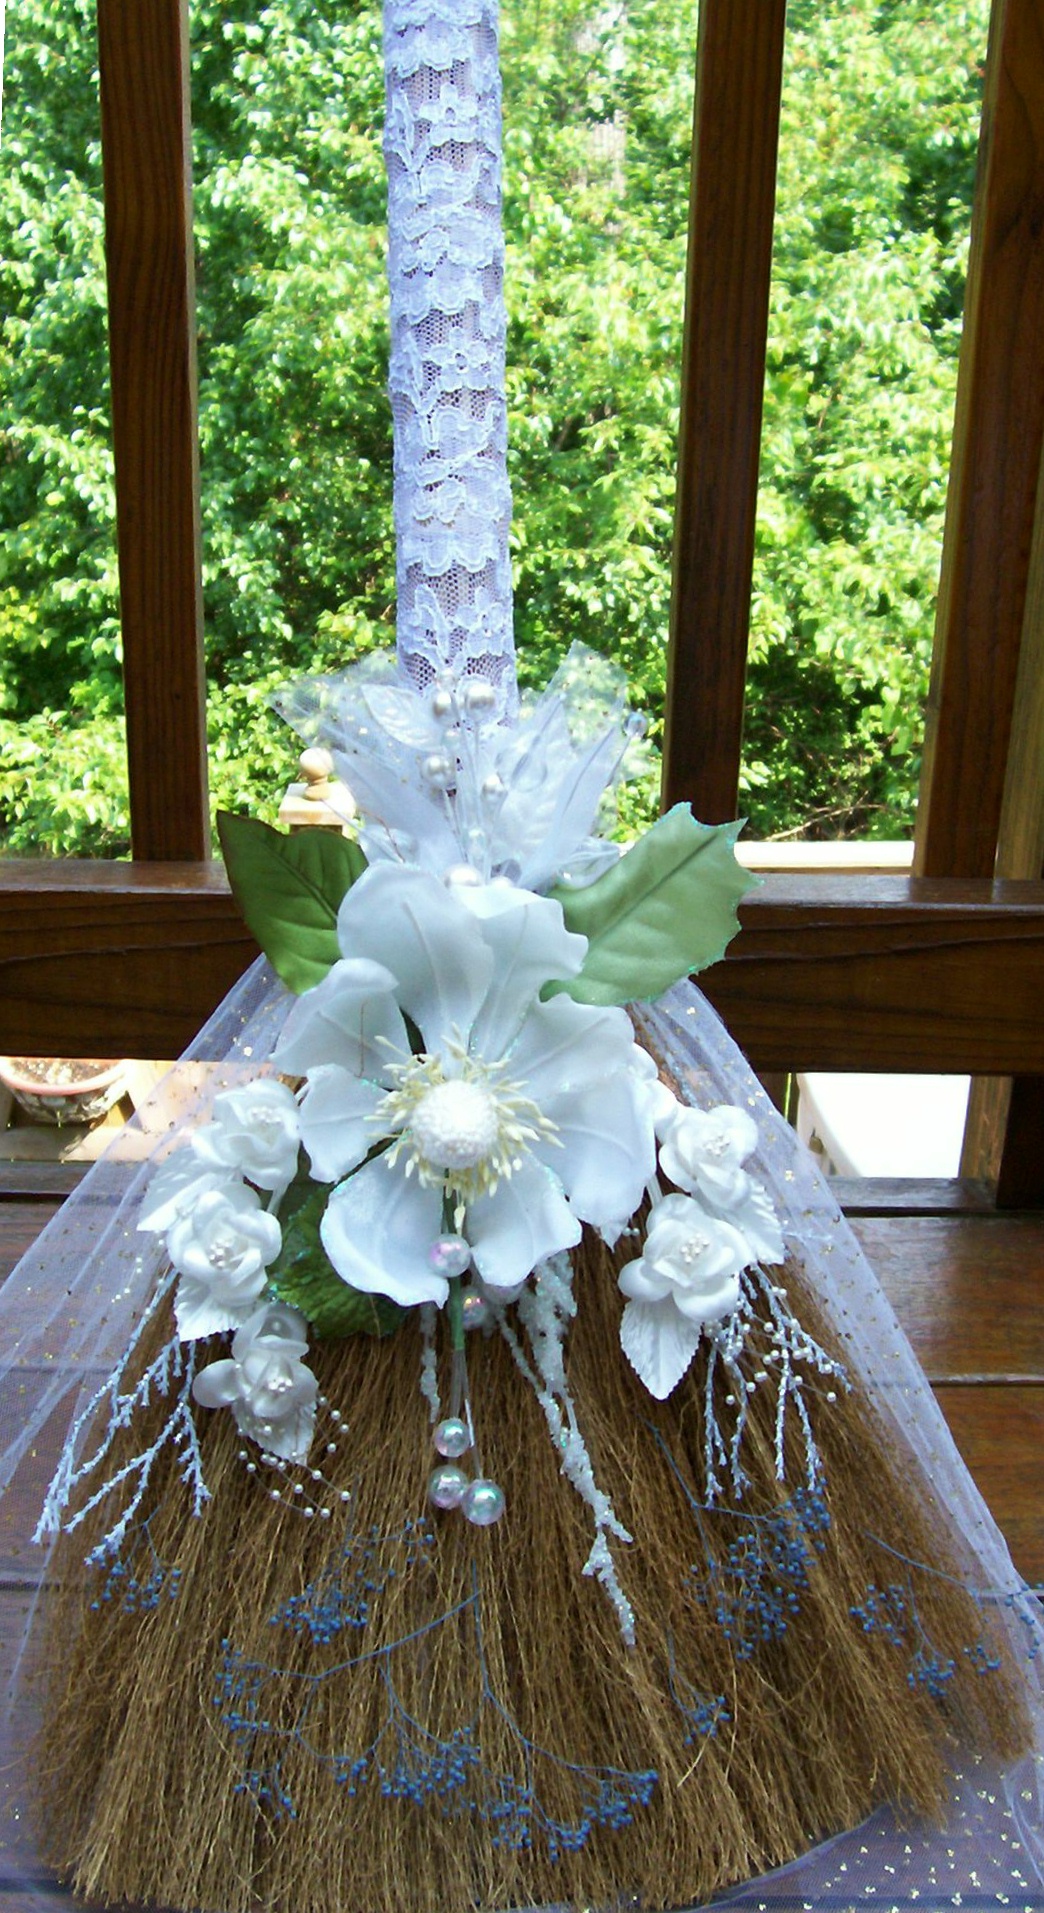 Jumping the Broom, Wedding Brooms, Jumping Brooms, Unity Candles, African American Weddings, Black Weddings, Maryland Wedding Ministers, Wedding Clergy, Marriage Officiant, Wedding Ceremony Officiants, Chapel of Love Ceremonies, Prince Georges County Wedding Officiant, Civil Wedding Ceremonies, Wedding Officiant, Wedding Clergy, Civil Marriages, Maryland Wedding Officiants, Prince Georges County, Marriages